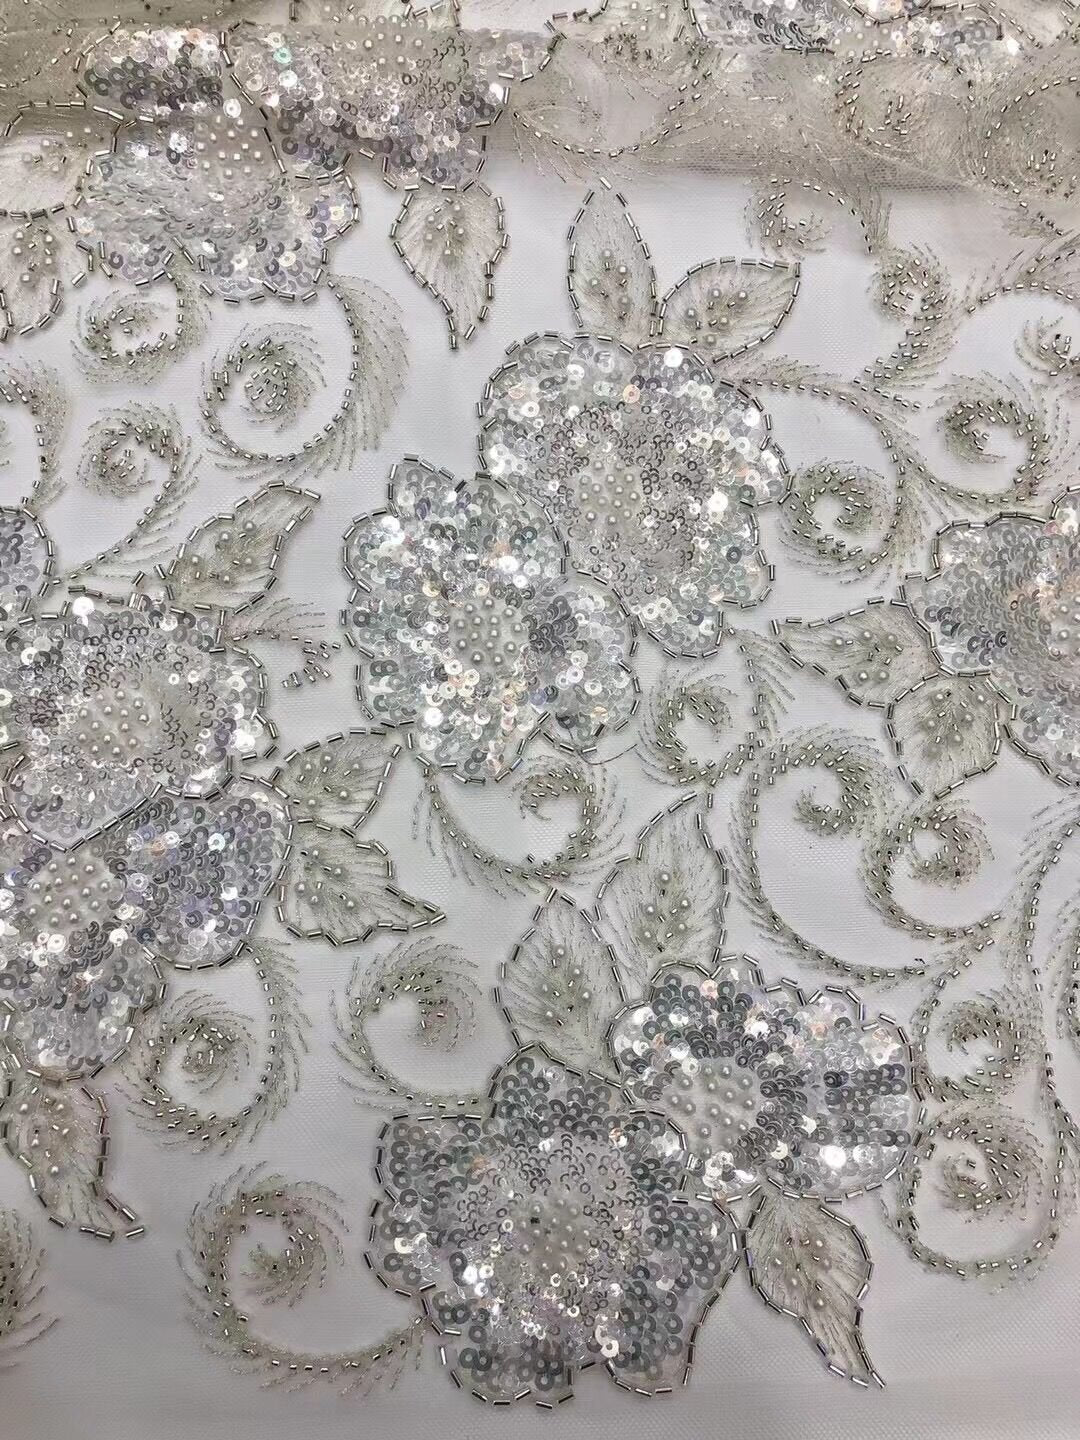 5 YARDS / 2 COLORS / Floral Beaded Embroidery Glitter Mesh Lace Wedding Party Dress Fabric - Classic & Modern